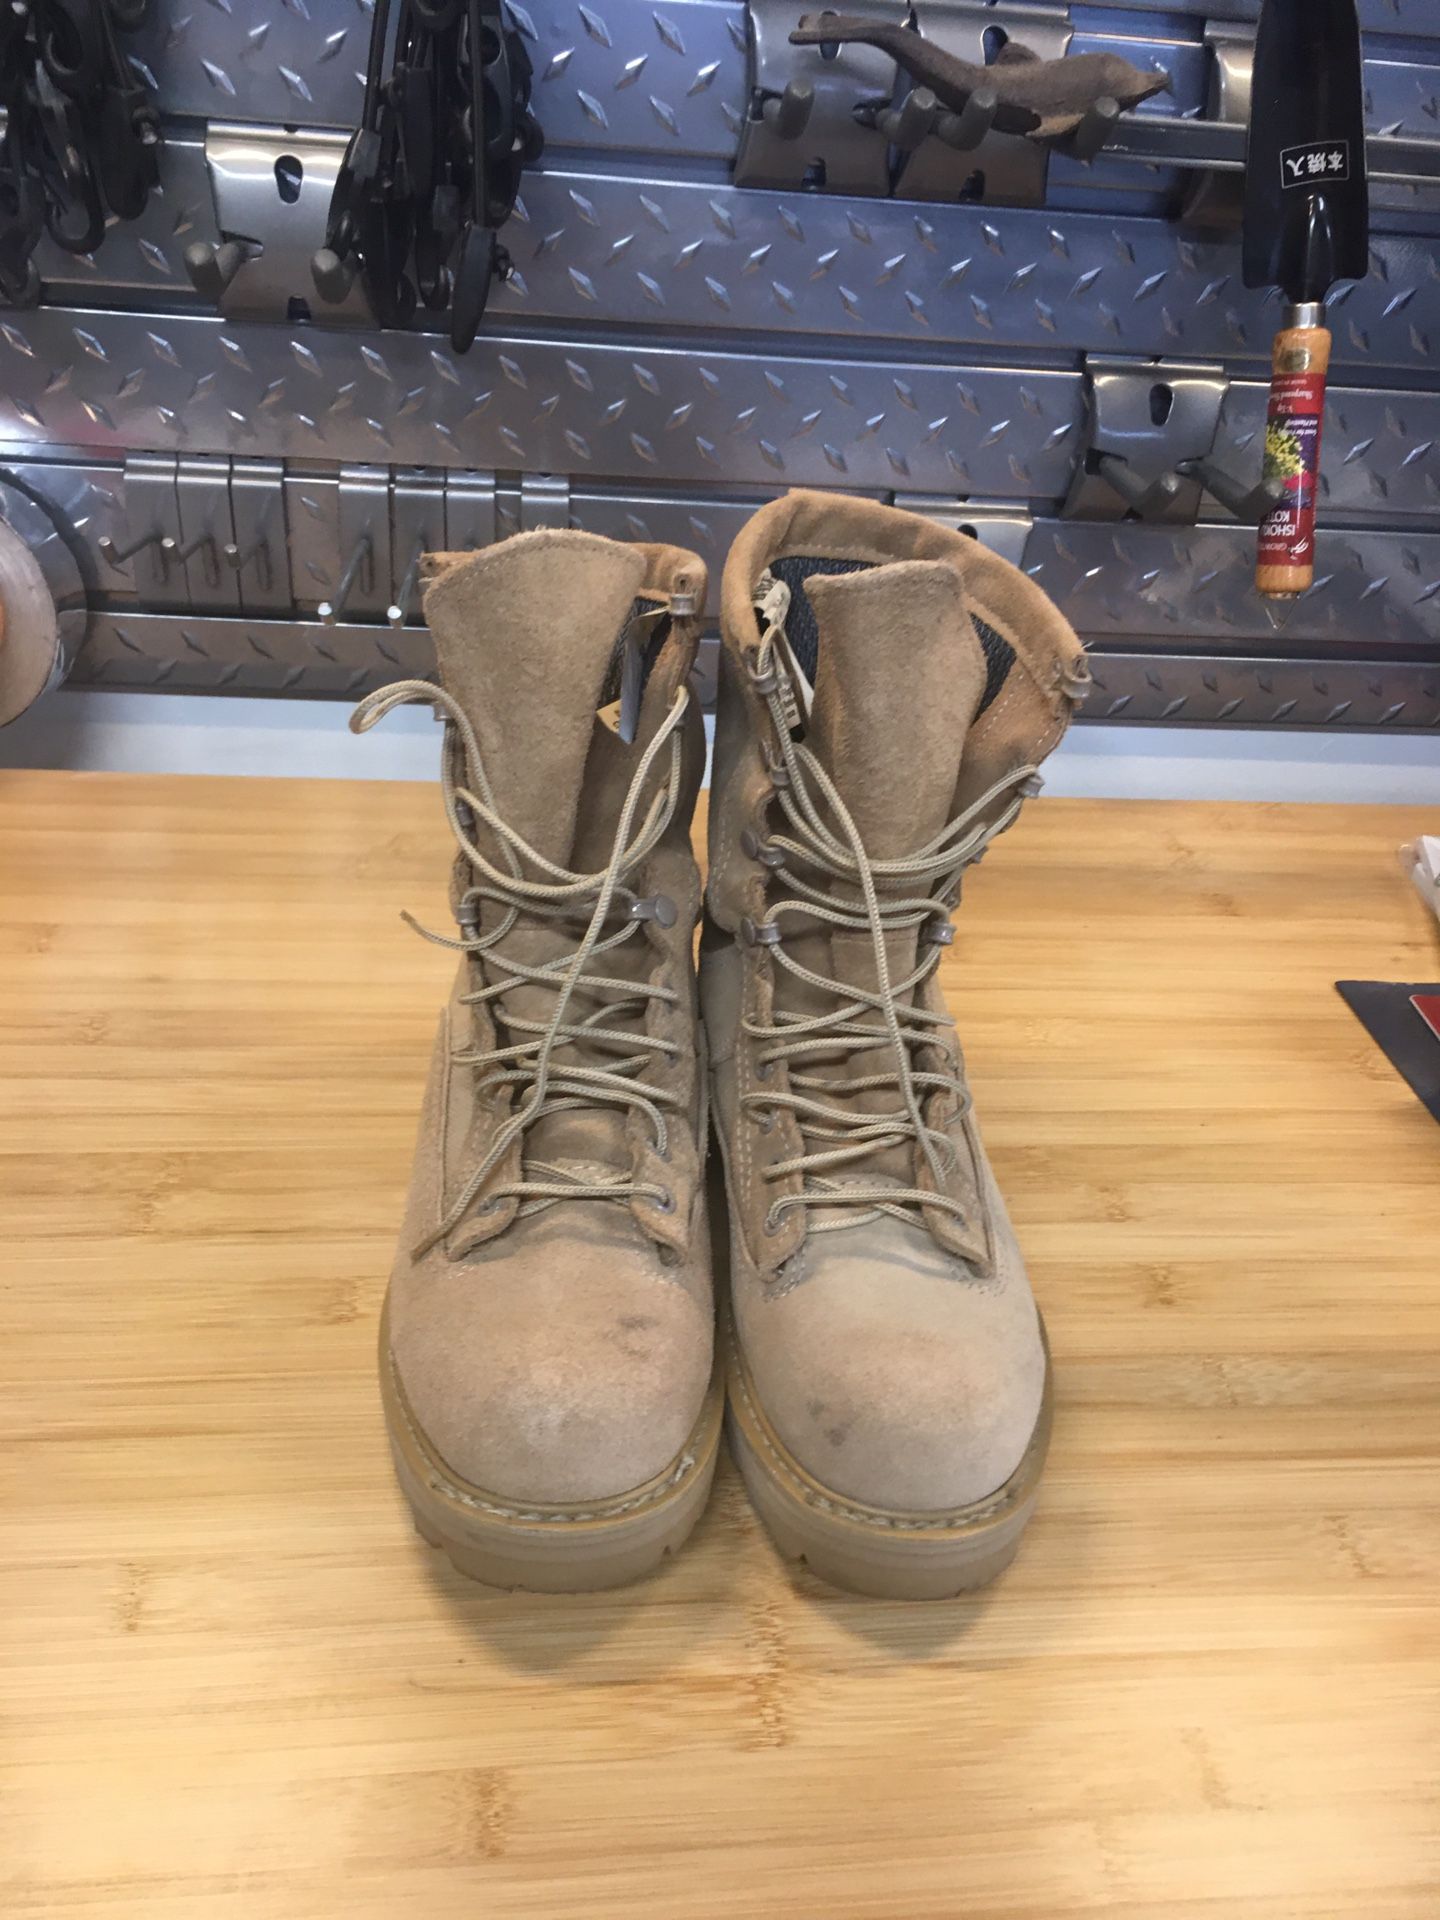 3 Sets Multiple Military Boots - Never Used